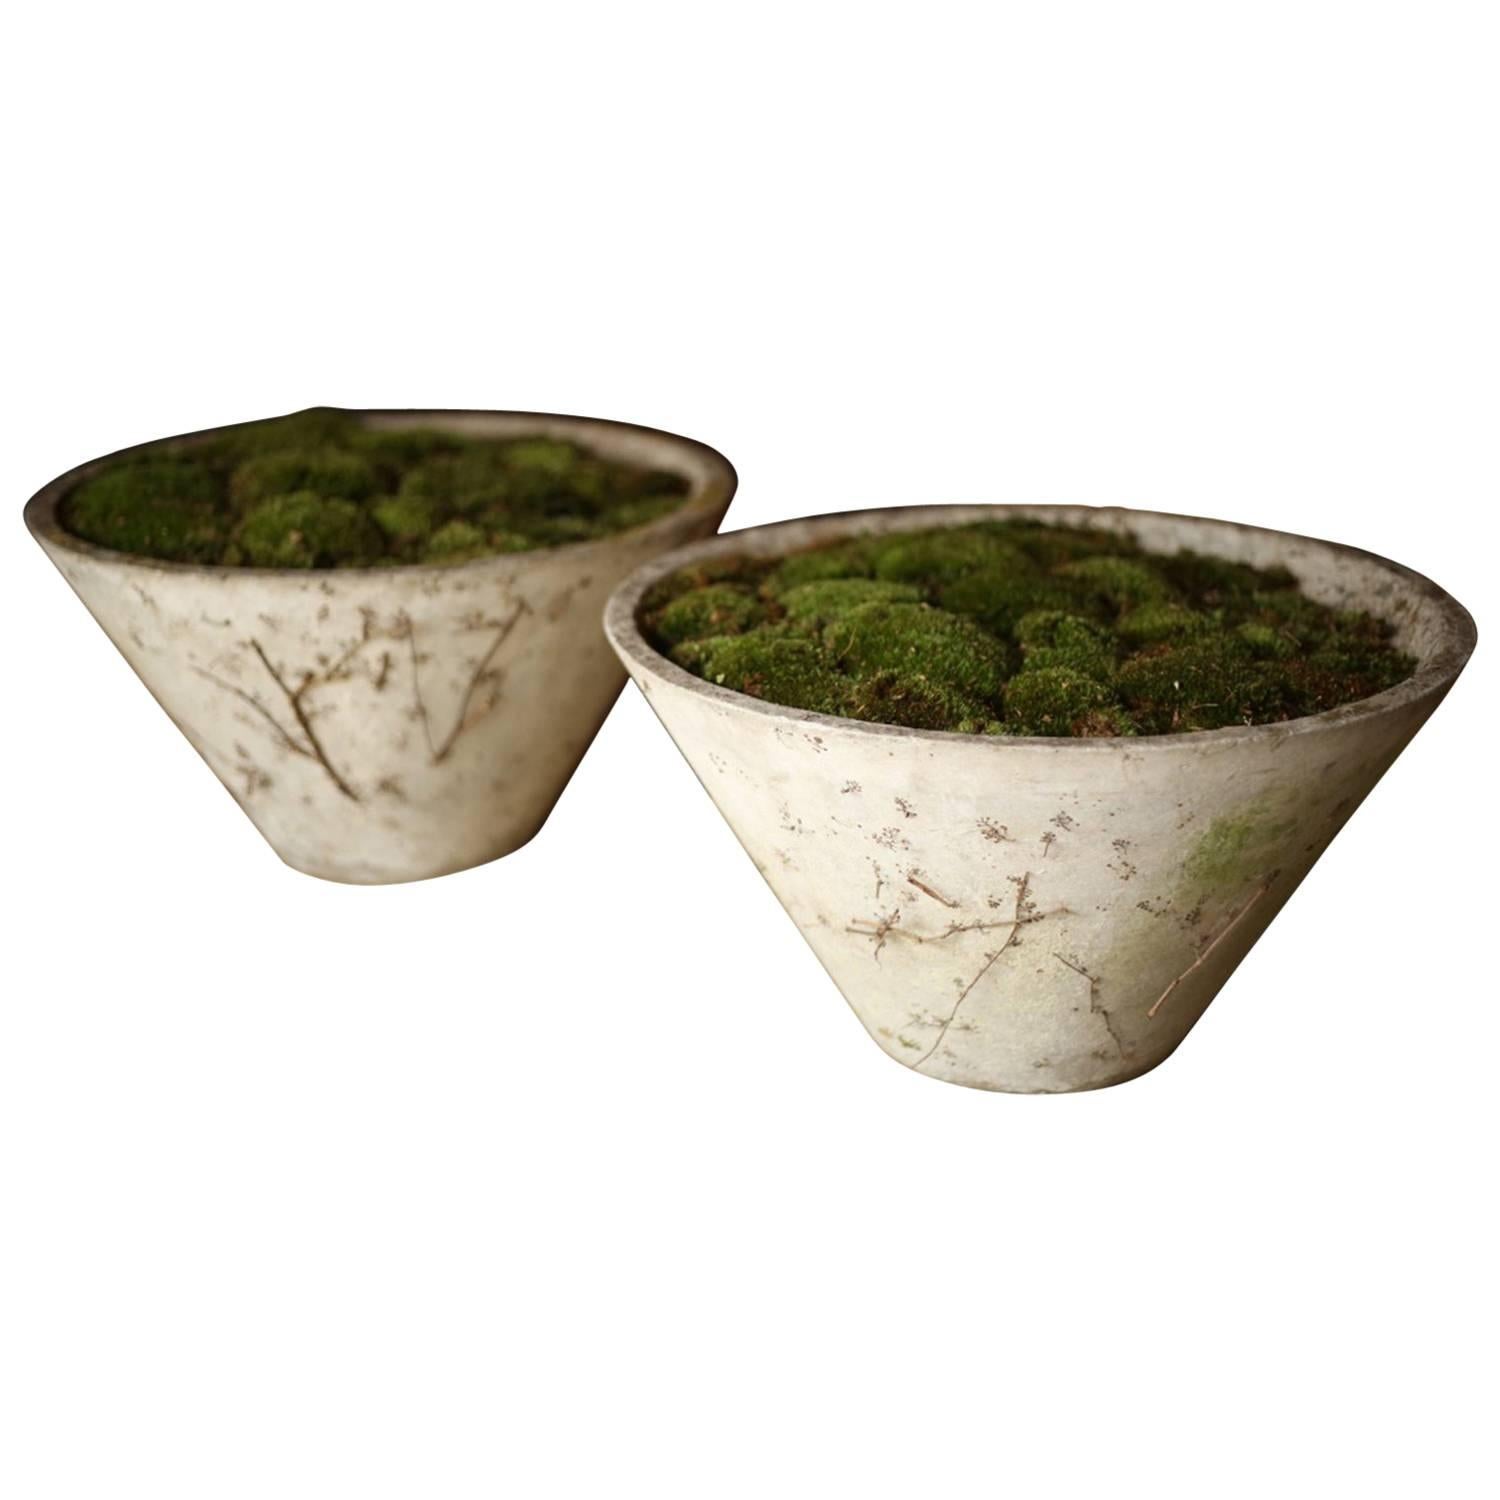 Pair of Mid-20th Century Willy Guhl Cone Planters